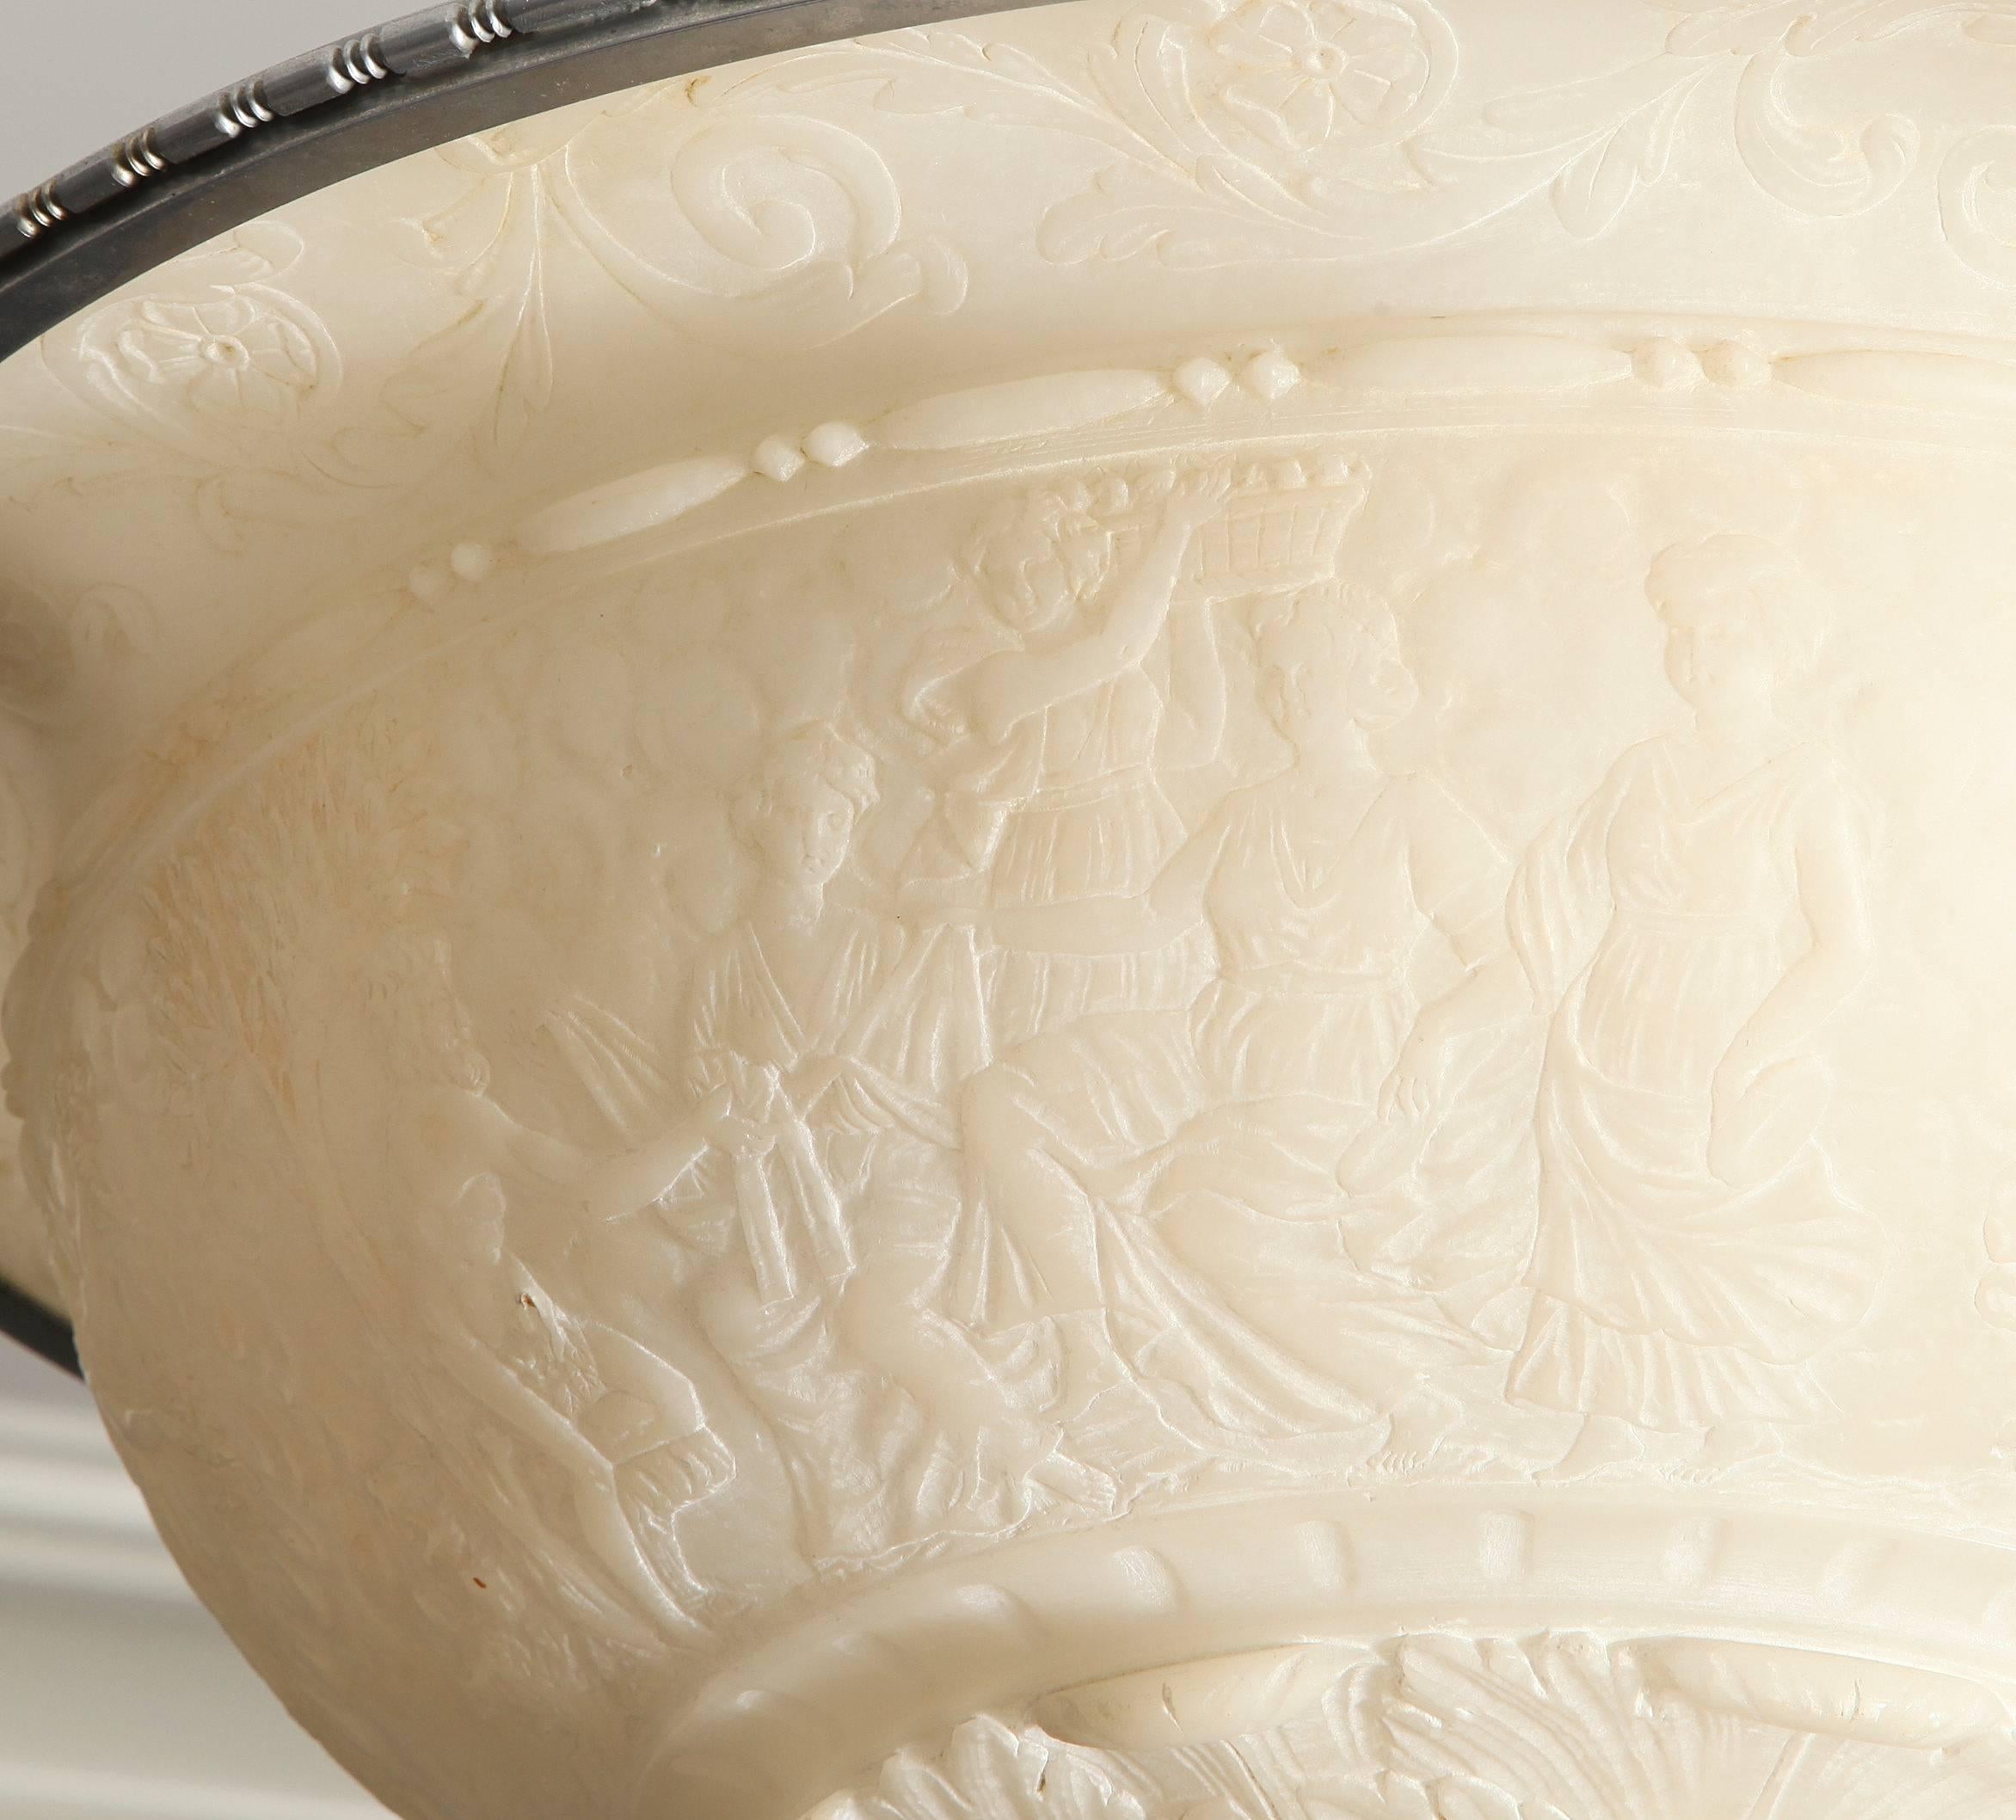 A neo-Classic design, cream colored alabaster pendant fixture, the alabaster without grey or black veining, hand-carved with classical design on the underside of the bowl, which is encircles by leaf-tip molded edge in nickel-plated bronze and